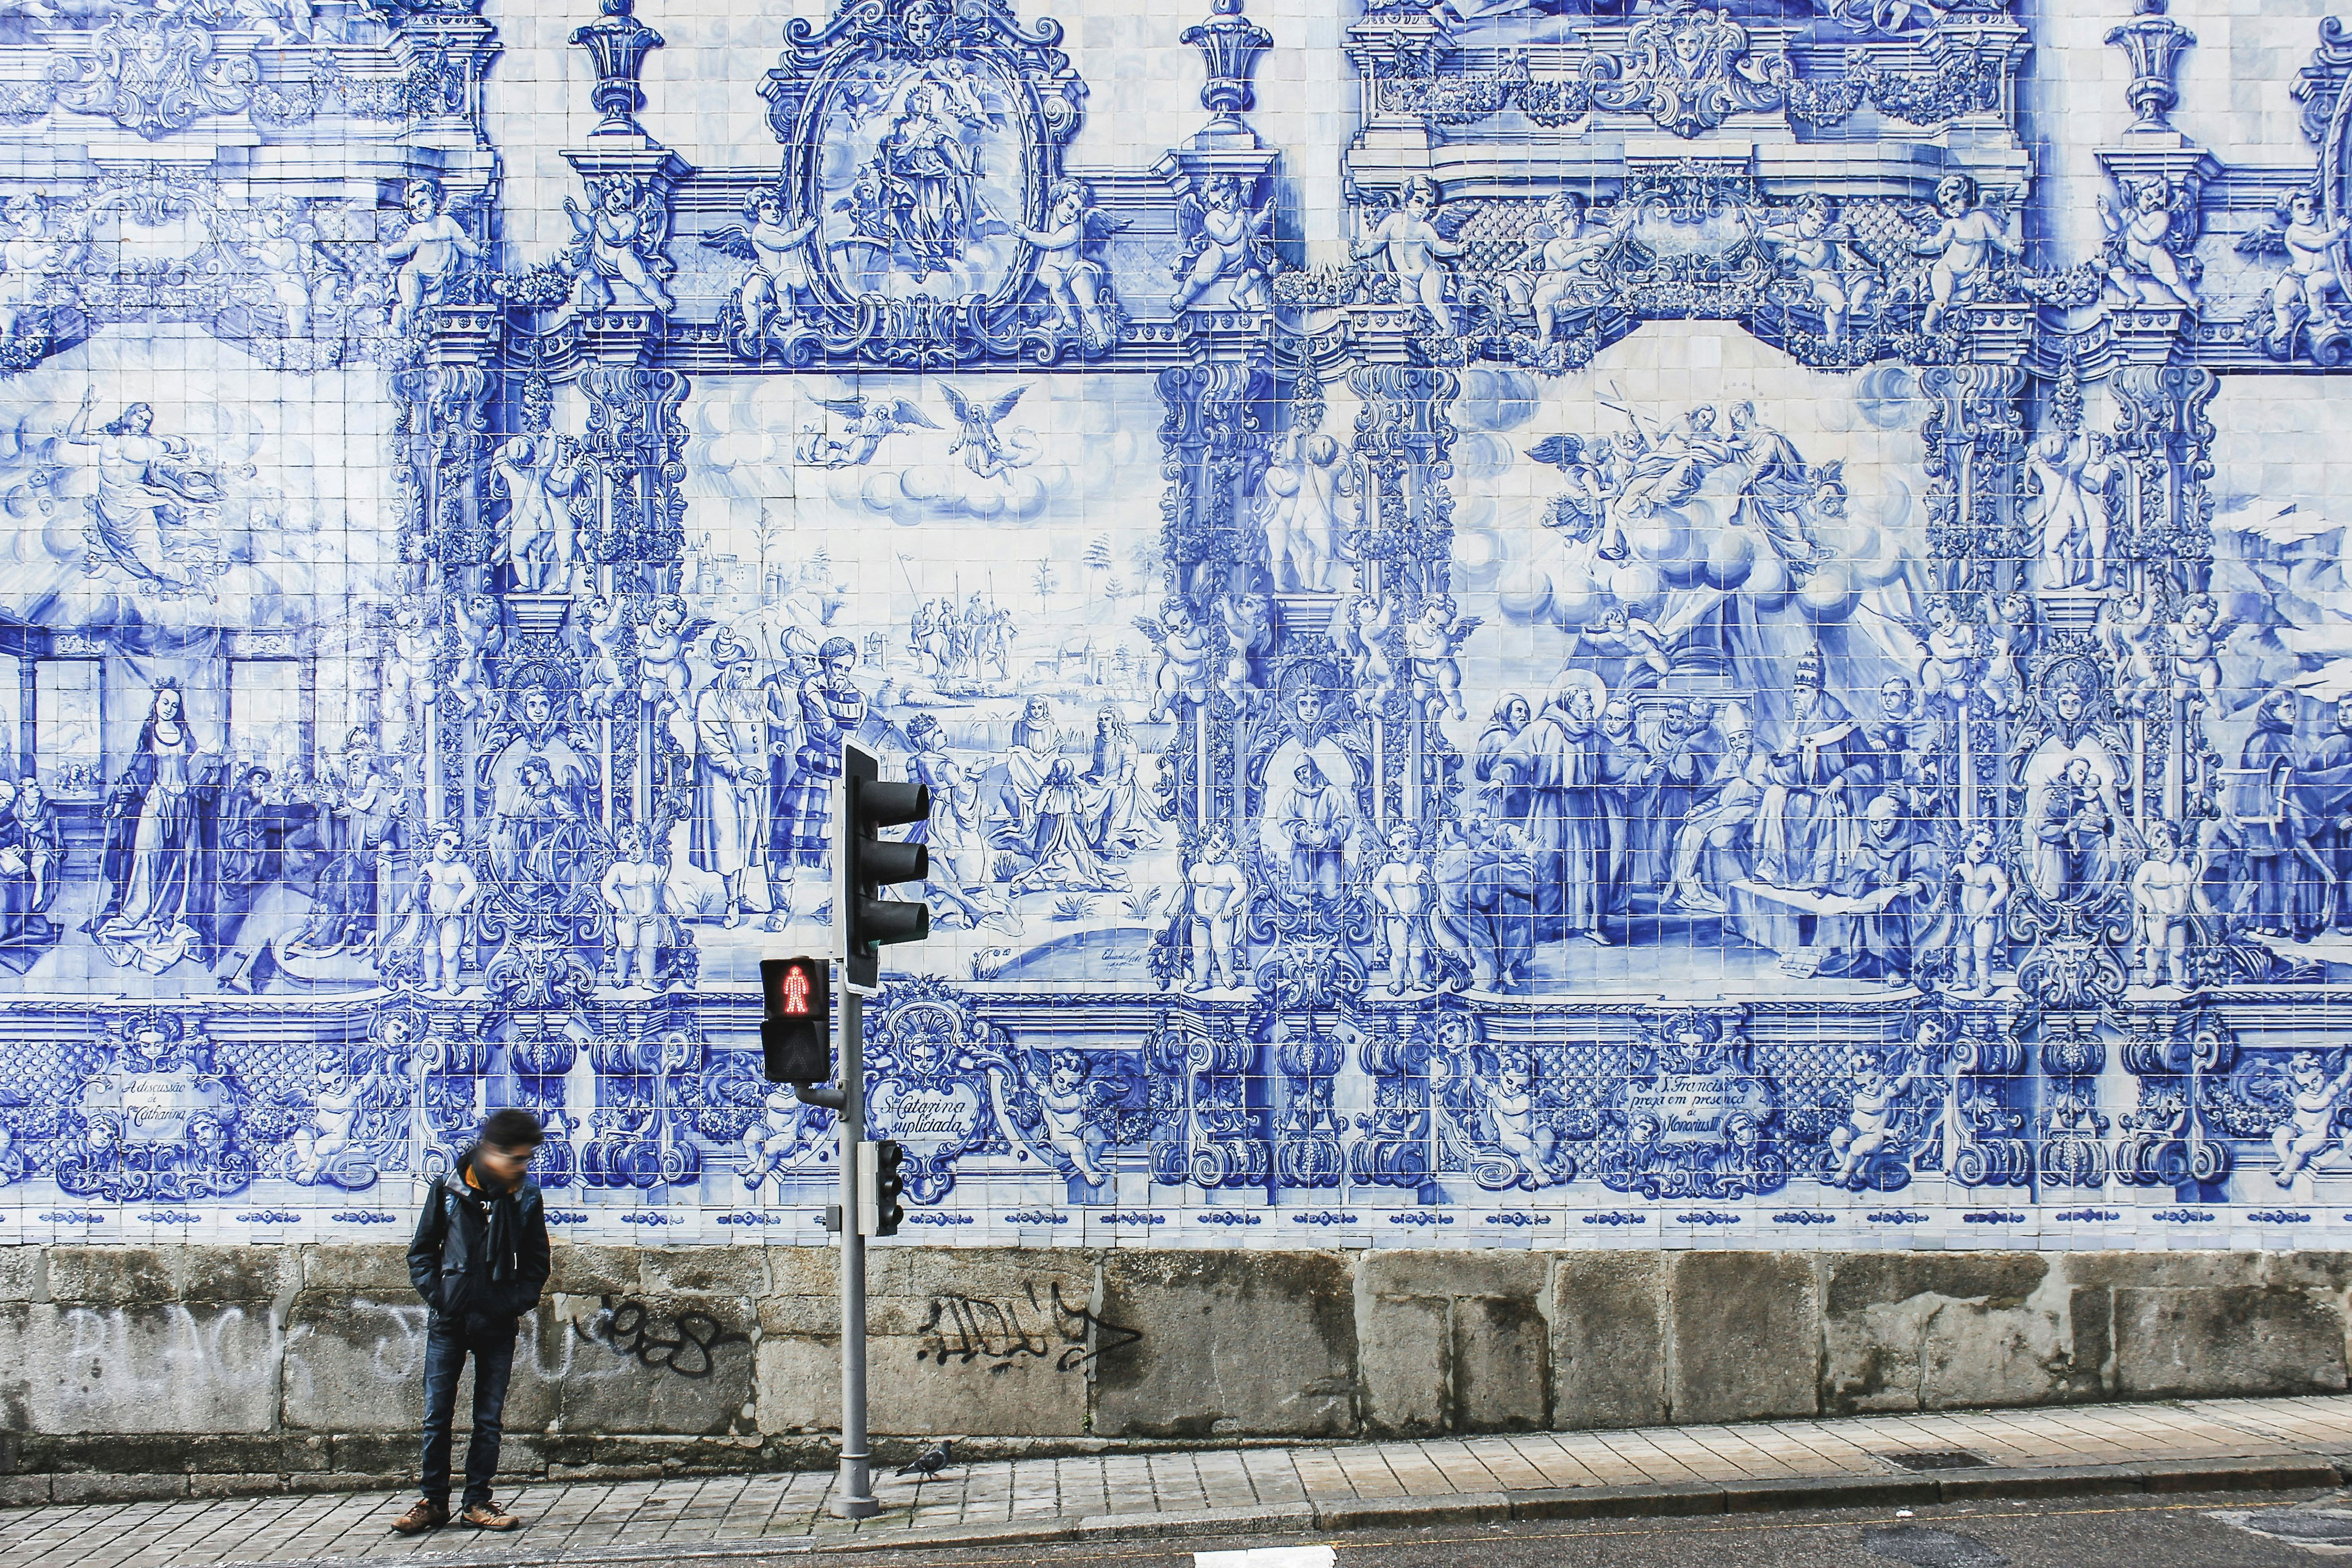 Portugal has long been known as an <a href="https://www.cntraveler.com/gallery/best-places-in-the-world-to-retire?mbid=synd_msn_rss&utm_source=msn&utm_medium=syndication">excellent place to retire</a>, so it’s no surprise that it’s one of the best countries for expats as well. Aside from its glorious Mediterranean climate and great food, the European country boasts a low cost of living (especially compared to its neighbors) and welcoming locals—in fact, 80% of Portugal-based expats reported that the population is friendly to foreign residents, which is significantly higher than the global average (65%).<p>Sign up to receive the latest news, expert tips, and inspiration on all things travel</p><a href="https://www.cntraveler.com/newsletter/the-daily?sourceCode=msnsend">Inspire Me</a>